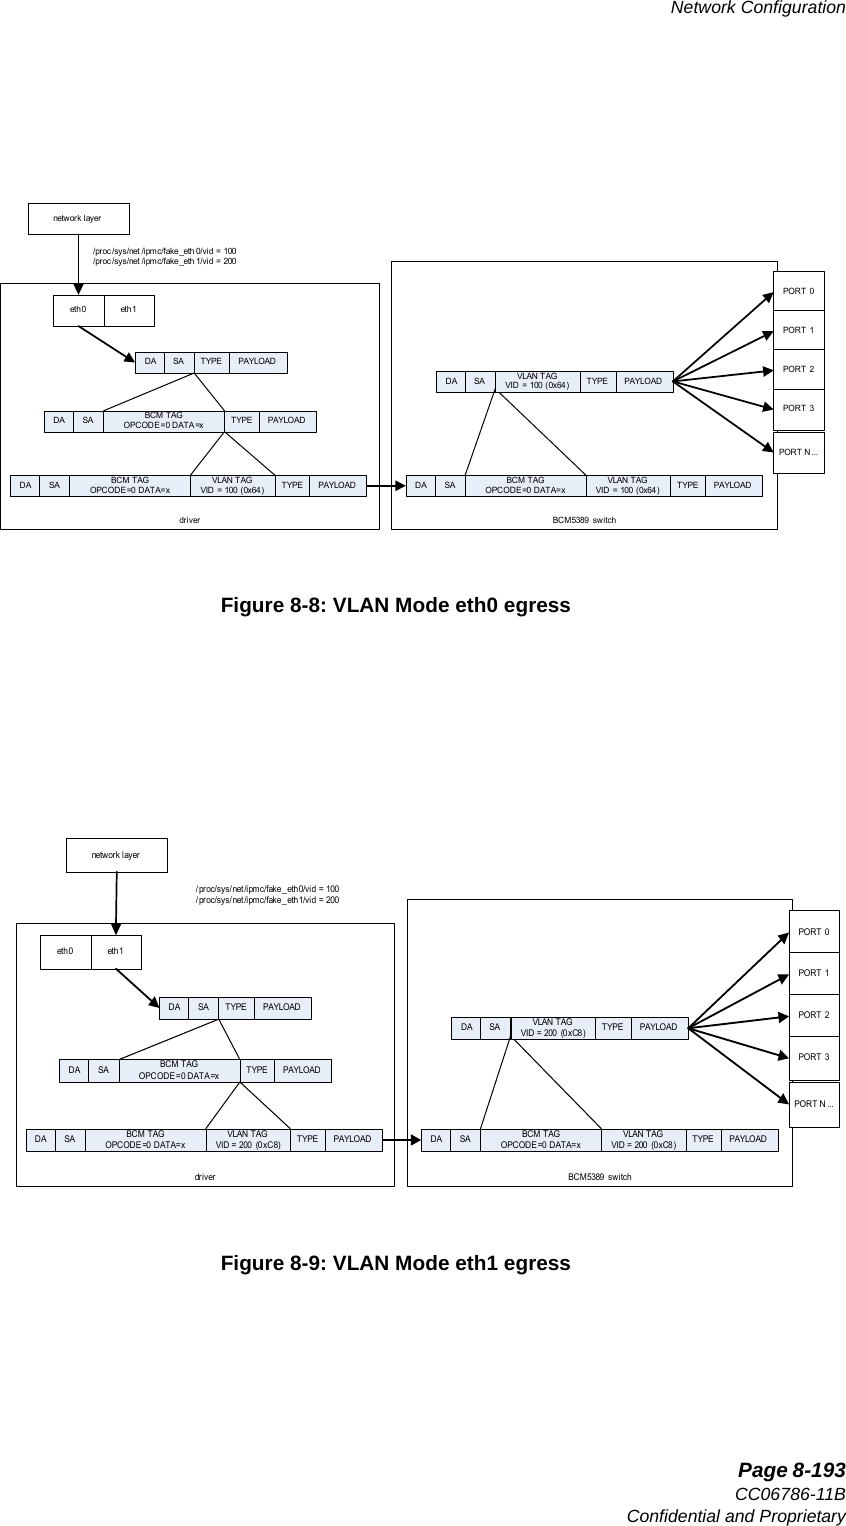   Page 8-193CC06786-11BConfidential and ProprietaryNetwork Configuration14ABABPreliminaryFigure 8-8: VLAN Mode eth0 egressFigure 8-9: VLAN Mode eth1 egressdrivernetw ork l ay ereth 1eth 0BCM5389 sw itchBCM TAG OPCODE=0 DATA=xDA SA TYPE PAYLOADDA SA TYPE PAYLOADDA SA TYPE PAYLOADPORT 0PORT 1PORT 2PORT 3/proc /sys/net /ipmc/fake_eth 0/vid = 100/proc /sys/net /ipmc/fake_eth 1/vid = 200PORT N ...BCM  TAG OPCODE=0 DATA=xDA SA TYPE PAYLOADVLAN TAGVID =  100 (0x64 )BCM TAG OPCODE=0 DATA=xDA SA TYPE PAYLOADVLAN TAGVID =  100 (0x64 )VLAN TAGVID  =  100 (0x64)drivernetwork layereth 1eth 0BCM5389 switchBCM TAG OPCODE=0 DATA=xDA SA TYPE PAYLOADDA SA TYPE PAYLOADDA SA TYPE PAYLOADPORT 0PORT 1PORT 2PORT 3/ proc/sys/ net /ipmc/fake_ eth0/vid = 100/ proc/sys/ net /ipmc/fake_ eth1/vid = 200PORT N ...BCM  TAG OPCODE=0 DATA=xDA SA TYPE PAYLOADVLAN TAGVID =  200  (0xC8)BCM TAG OPCODE=0 DATA=xDA SA TYPE PAYLOADVLAN TAGVID =  200  (0 xC8)VLAN TAGVID  =  200  (0 xC8)